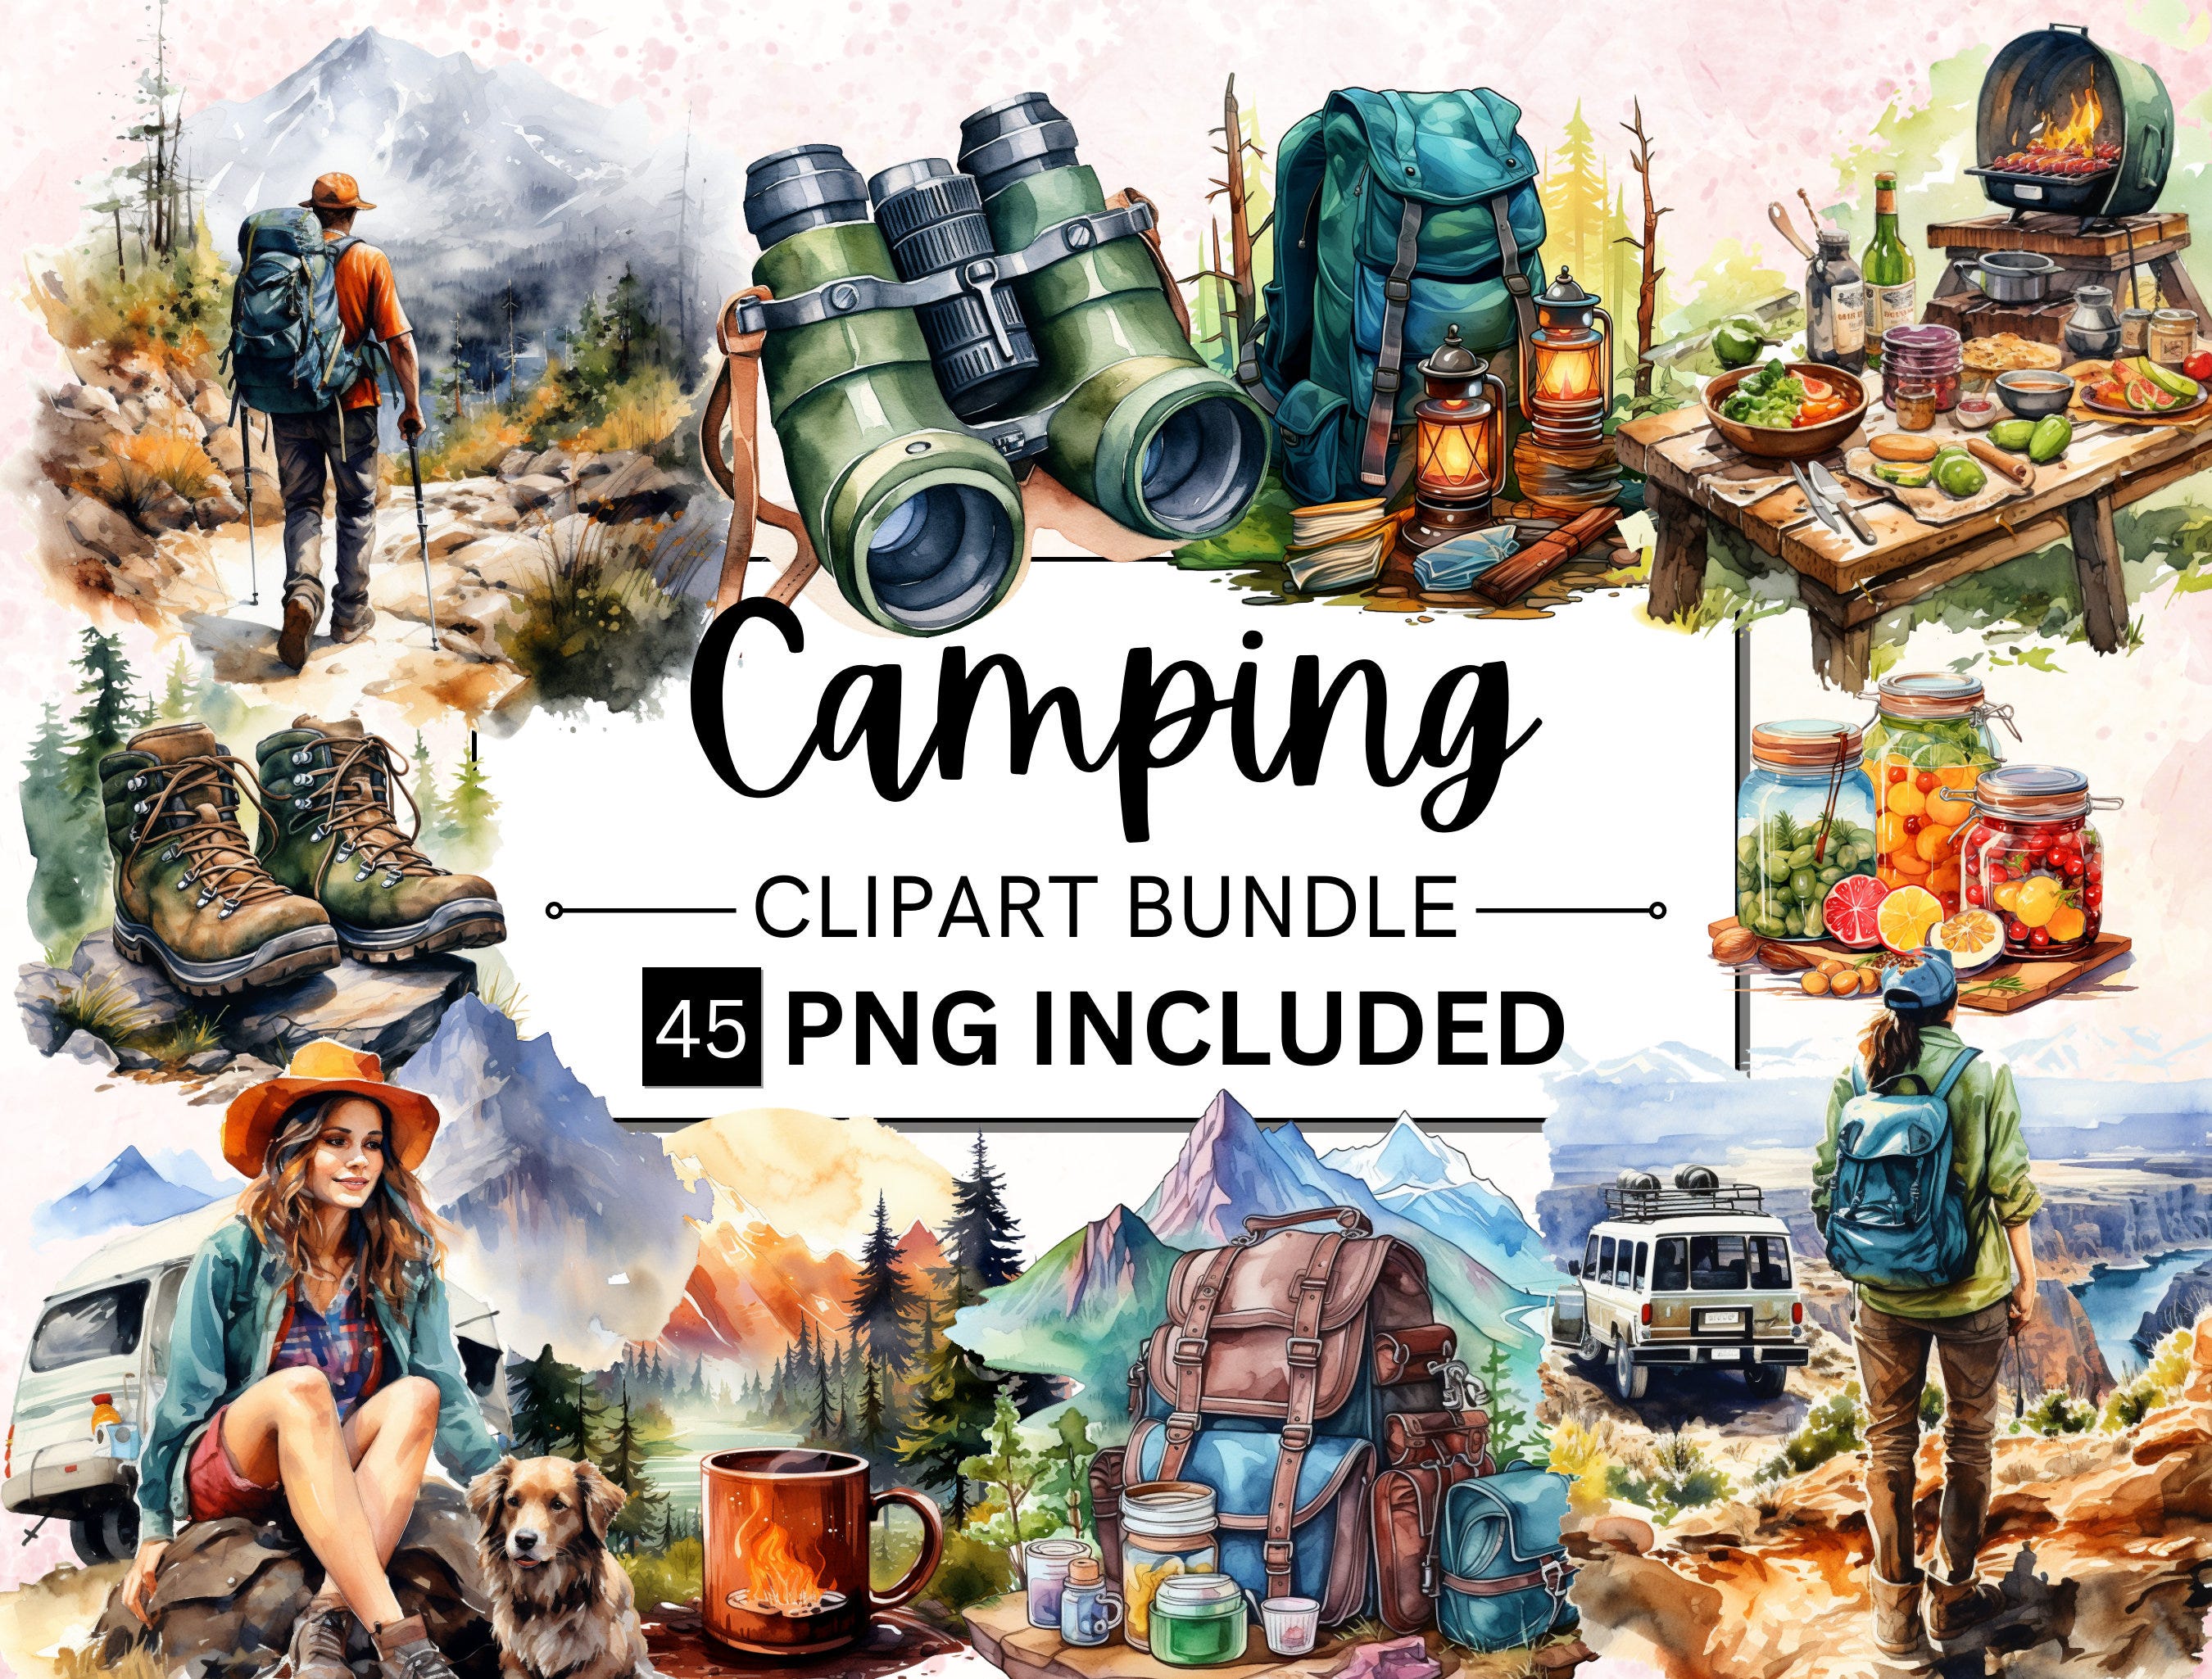 45 Watercolor Camping Clipart, Camping Sublimation PNG Bundle, Camp Life Tent, Campfire, Lantern, Backpack, Campsite Illustrations Cliparts